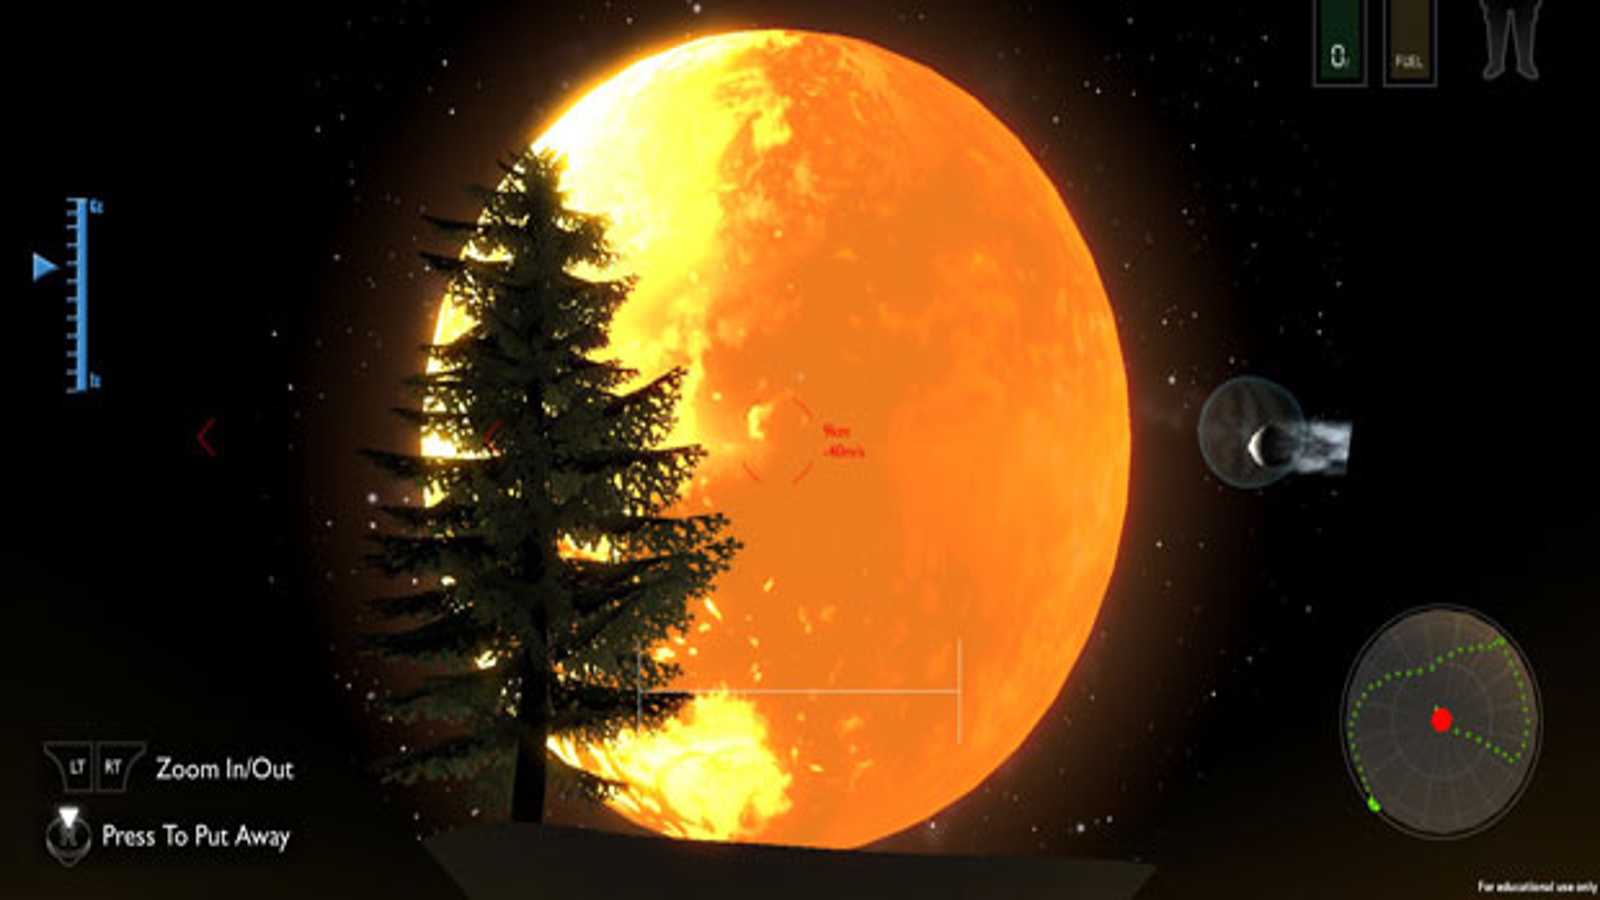 Outer Wilds wins grand prize at 2015 IGF Awards